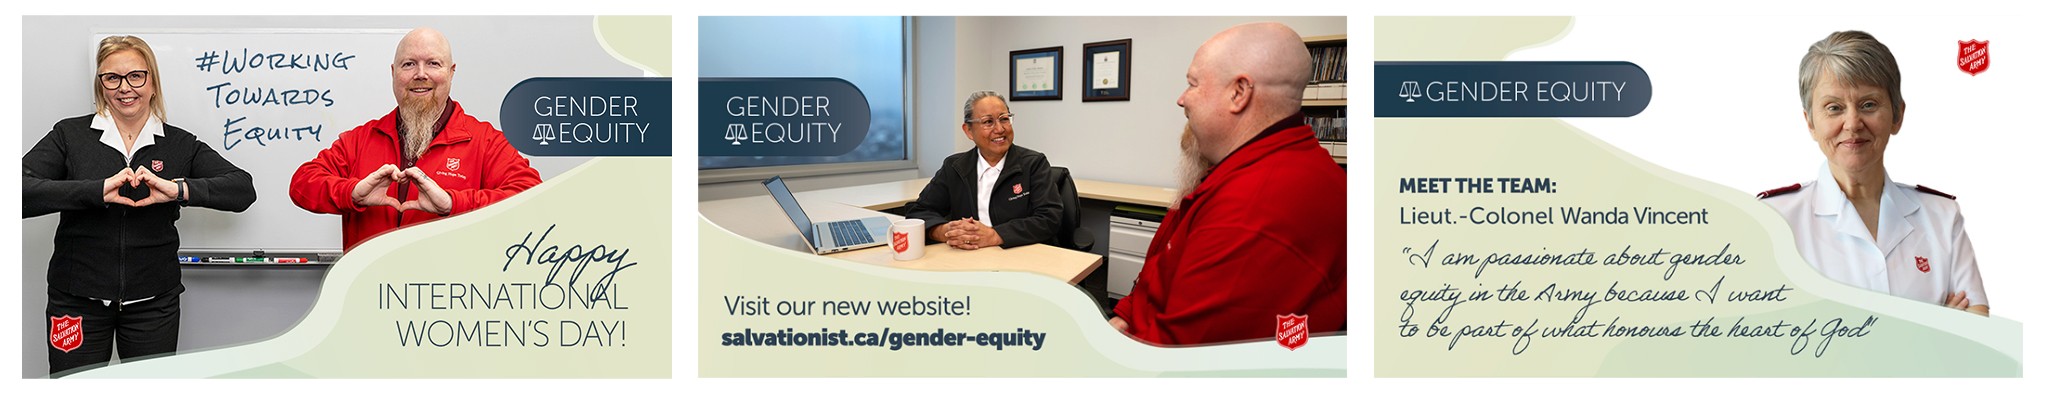 The Gender Equity promotional graphics for Twitter